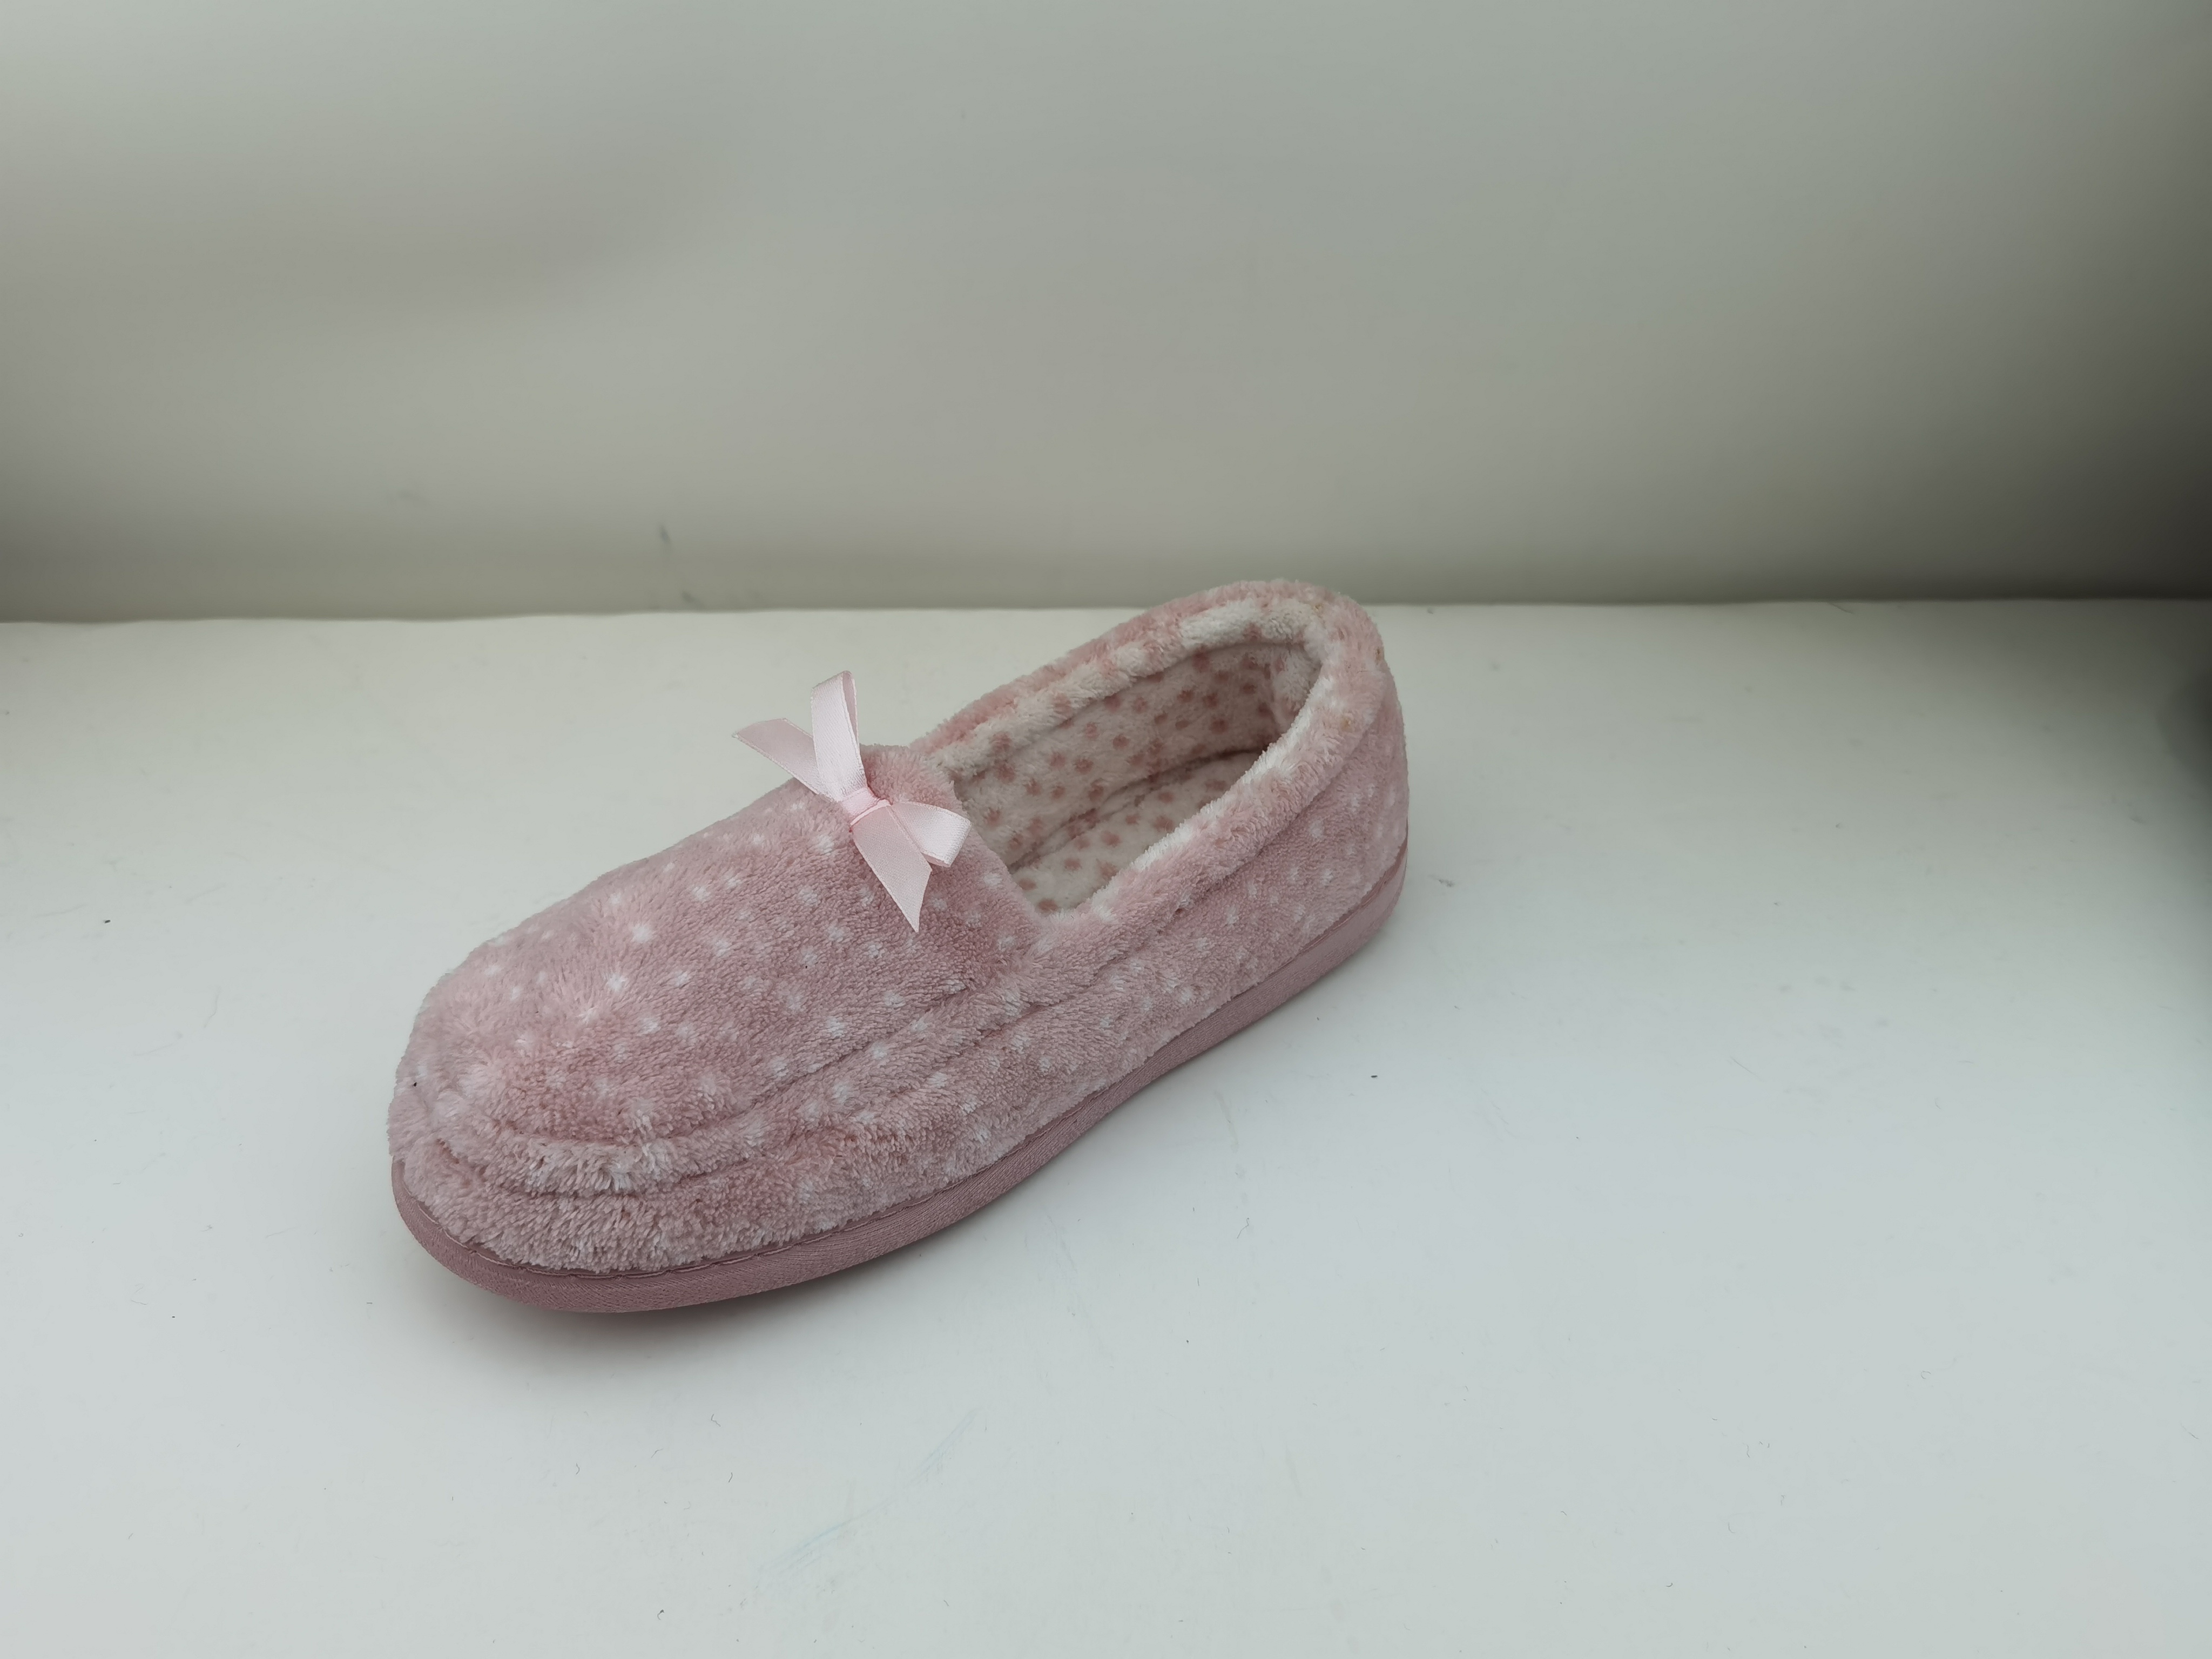 Women's Slip-On Slippers Memory Foam Slippers Plush Fleece Lined House Shoes Indoor/Outdoor Anti-Skid TPR Sole 